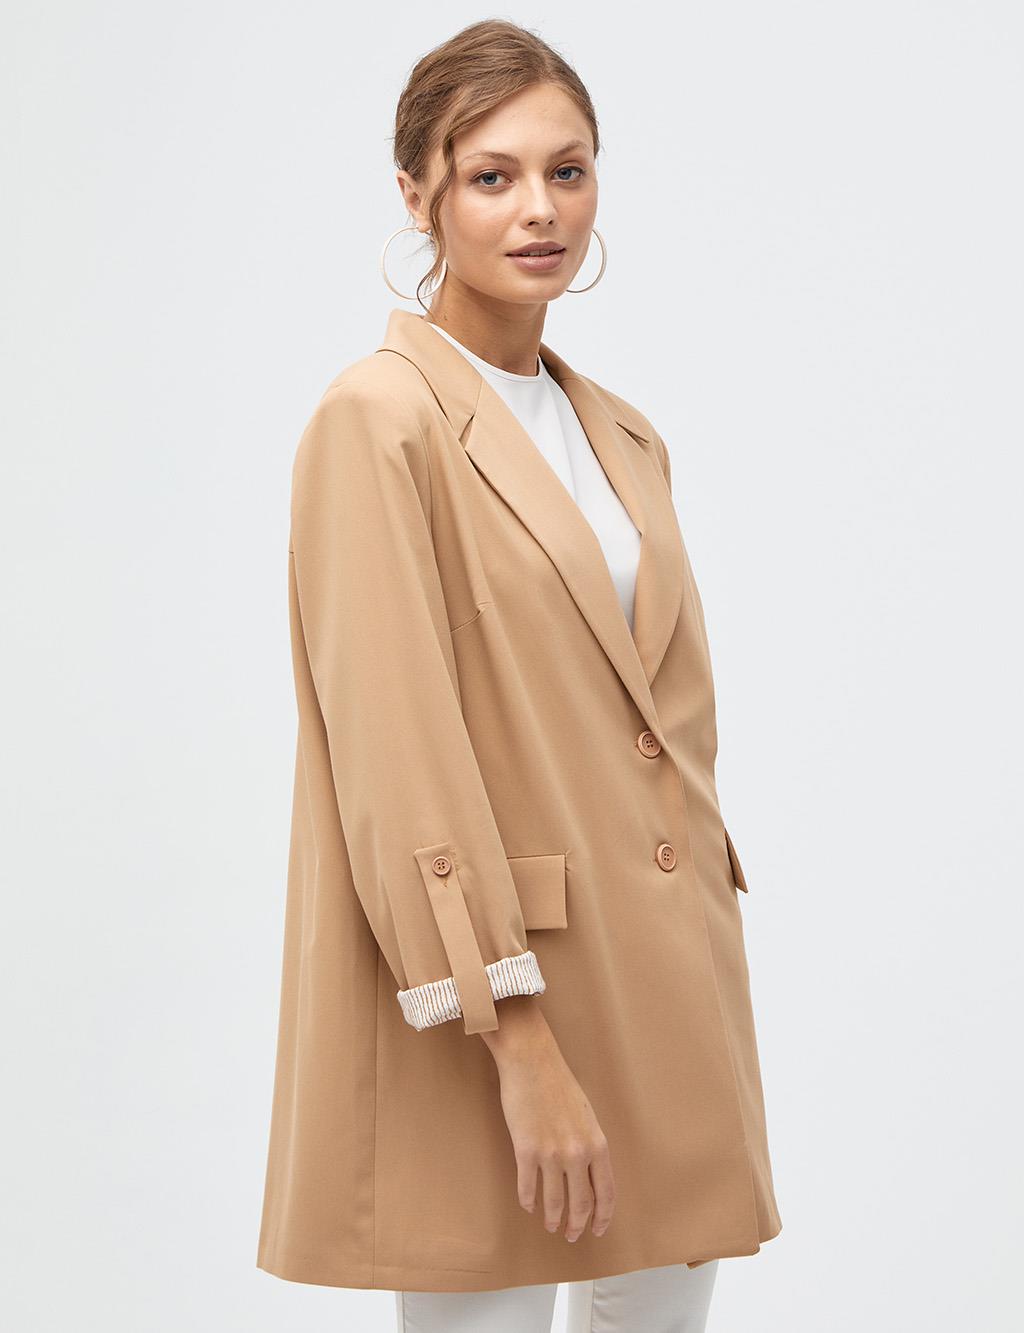 Blazer with Foldable Sleeves Beige